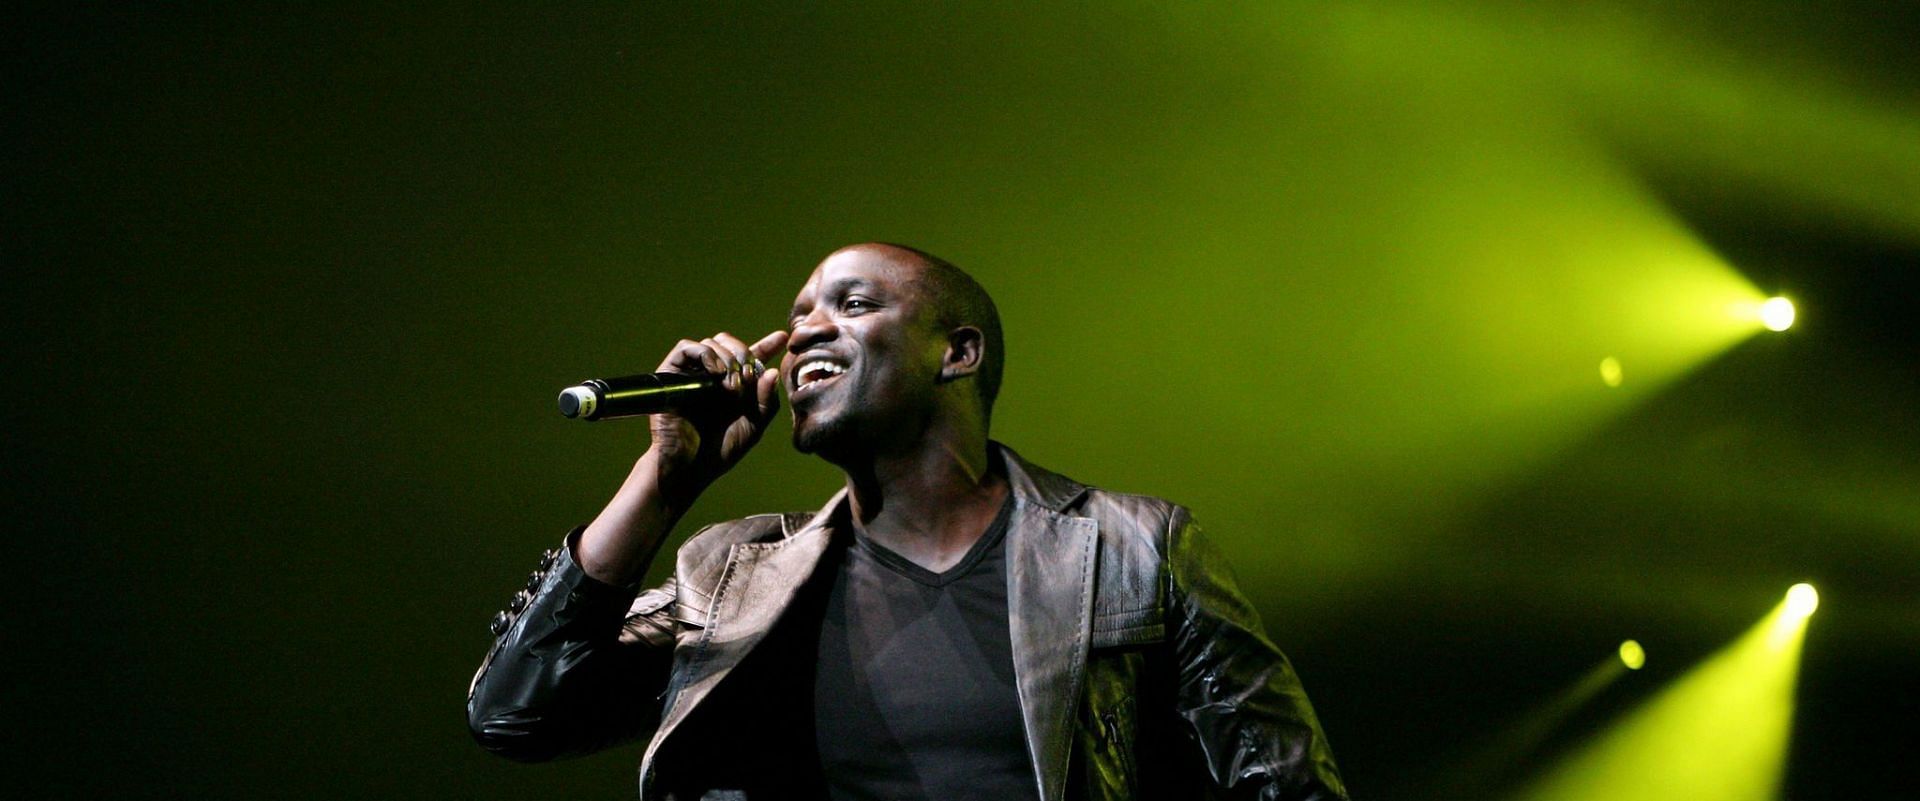 Netizens called out Akon over comments on fatherhood and Nick Cannon support (Image via Getty Images)